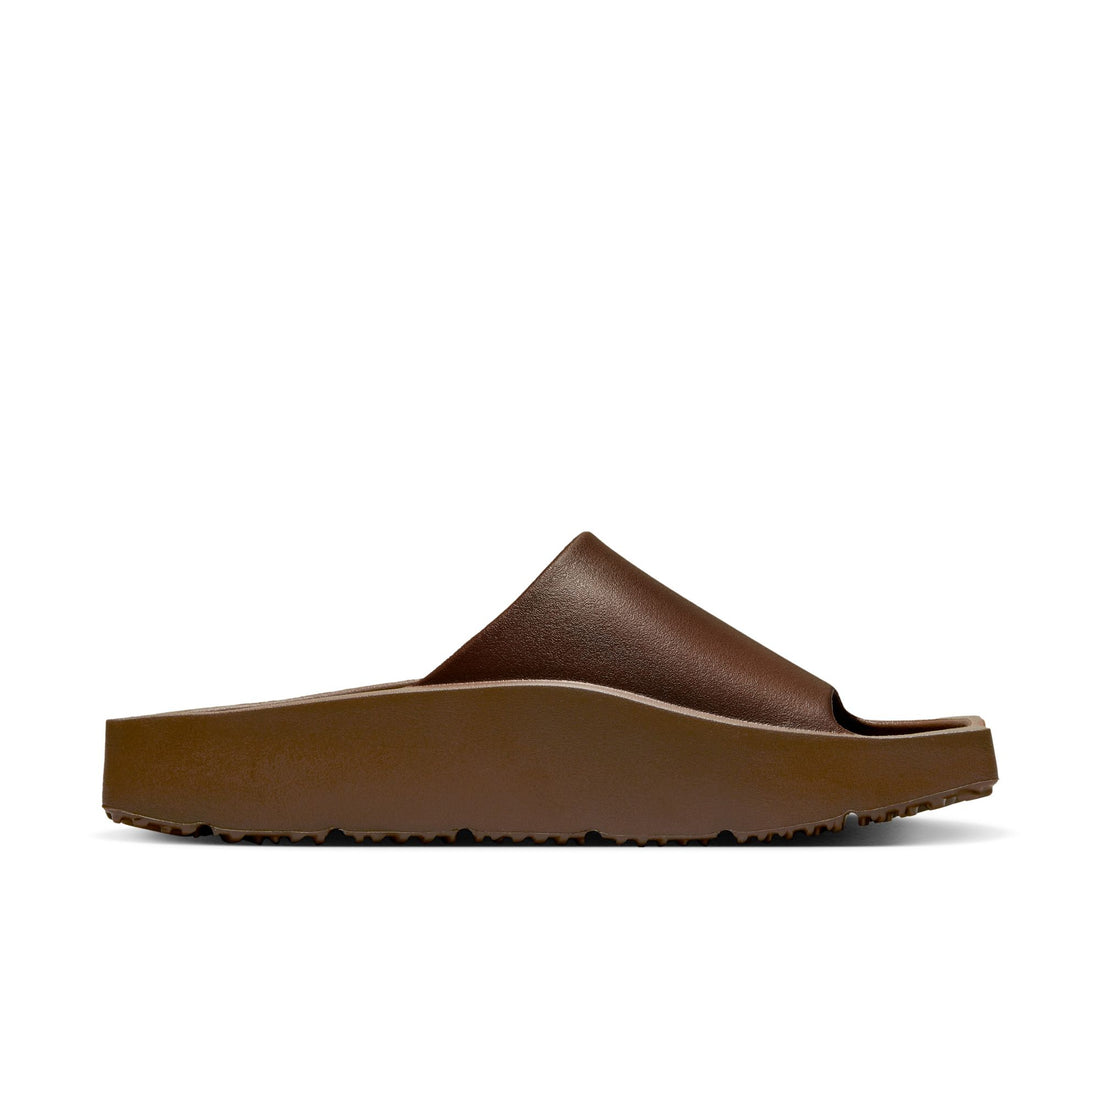 WMNS Jordan Hex Slide (Cacao Wow/Cacao Wow)